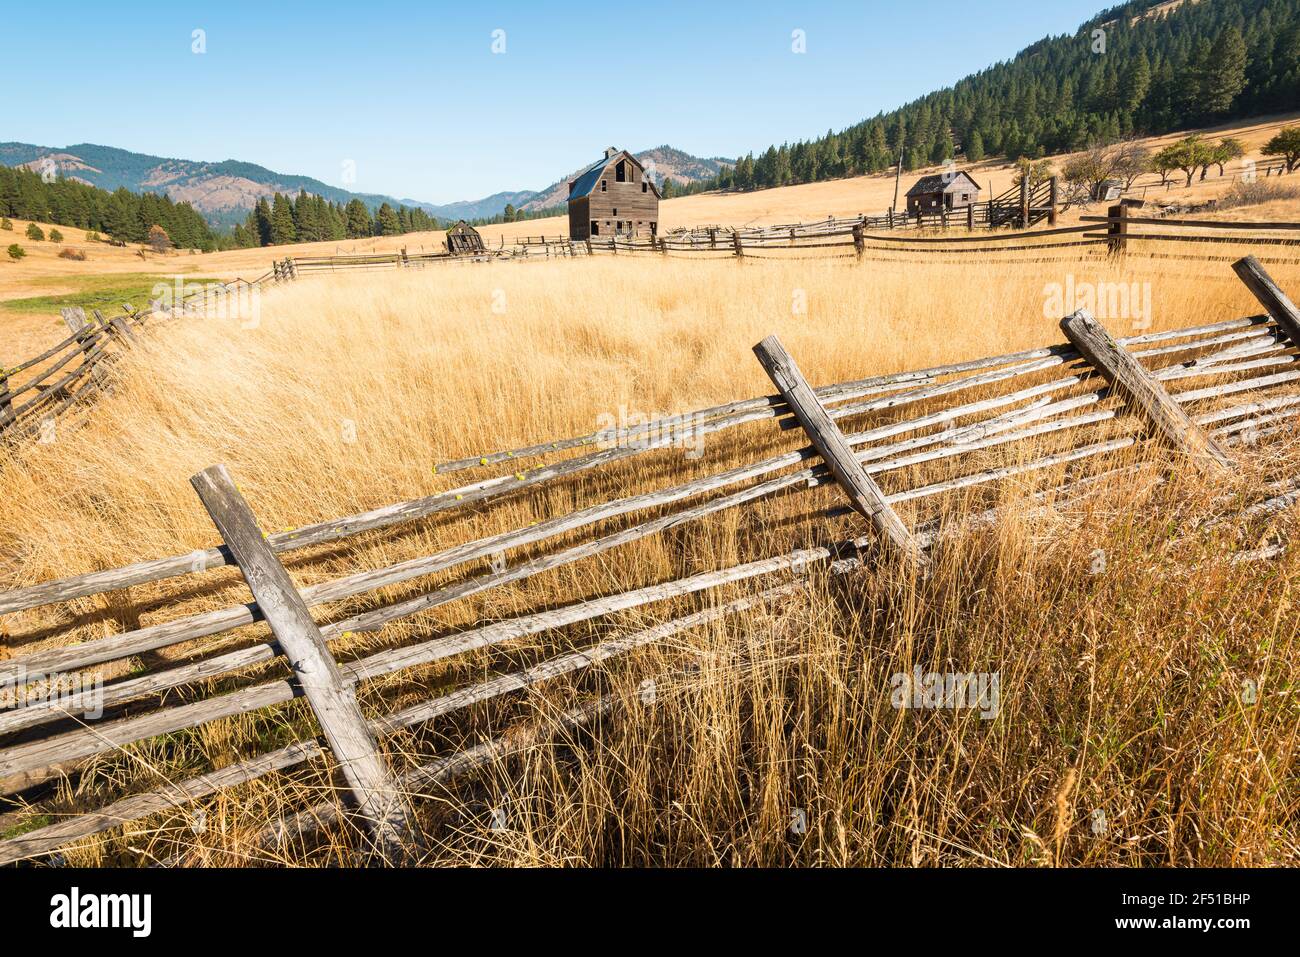 Late Fall scene in rural Eastern Washington State with broken fence falling over and an old barn near Cle Elum and the Cascade Mountains Stock Photo